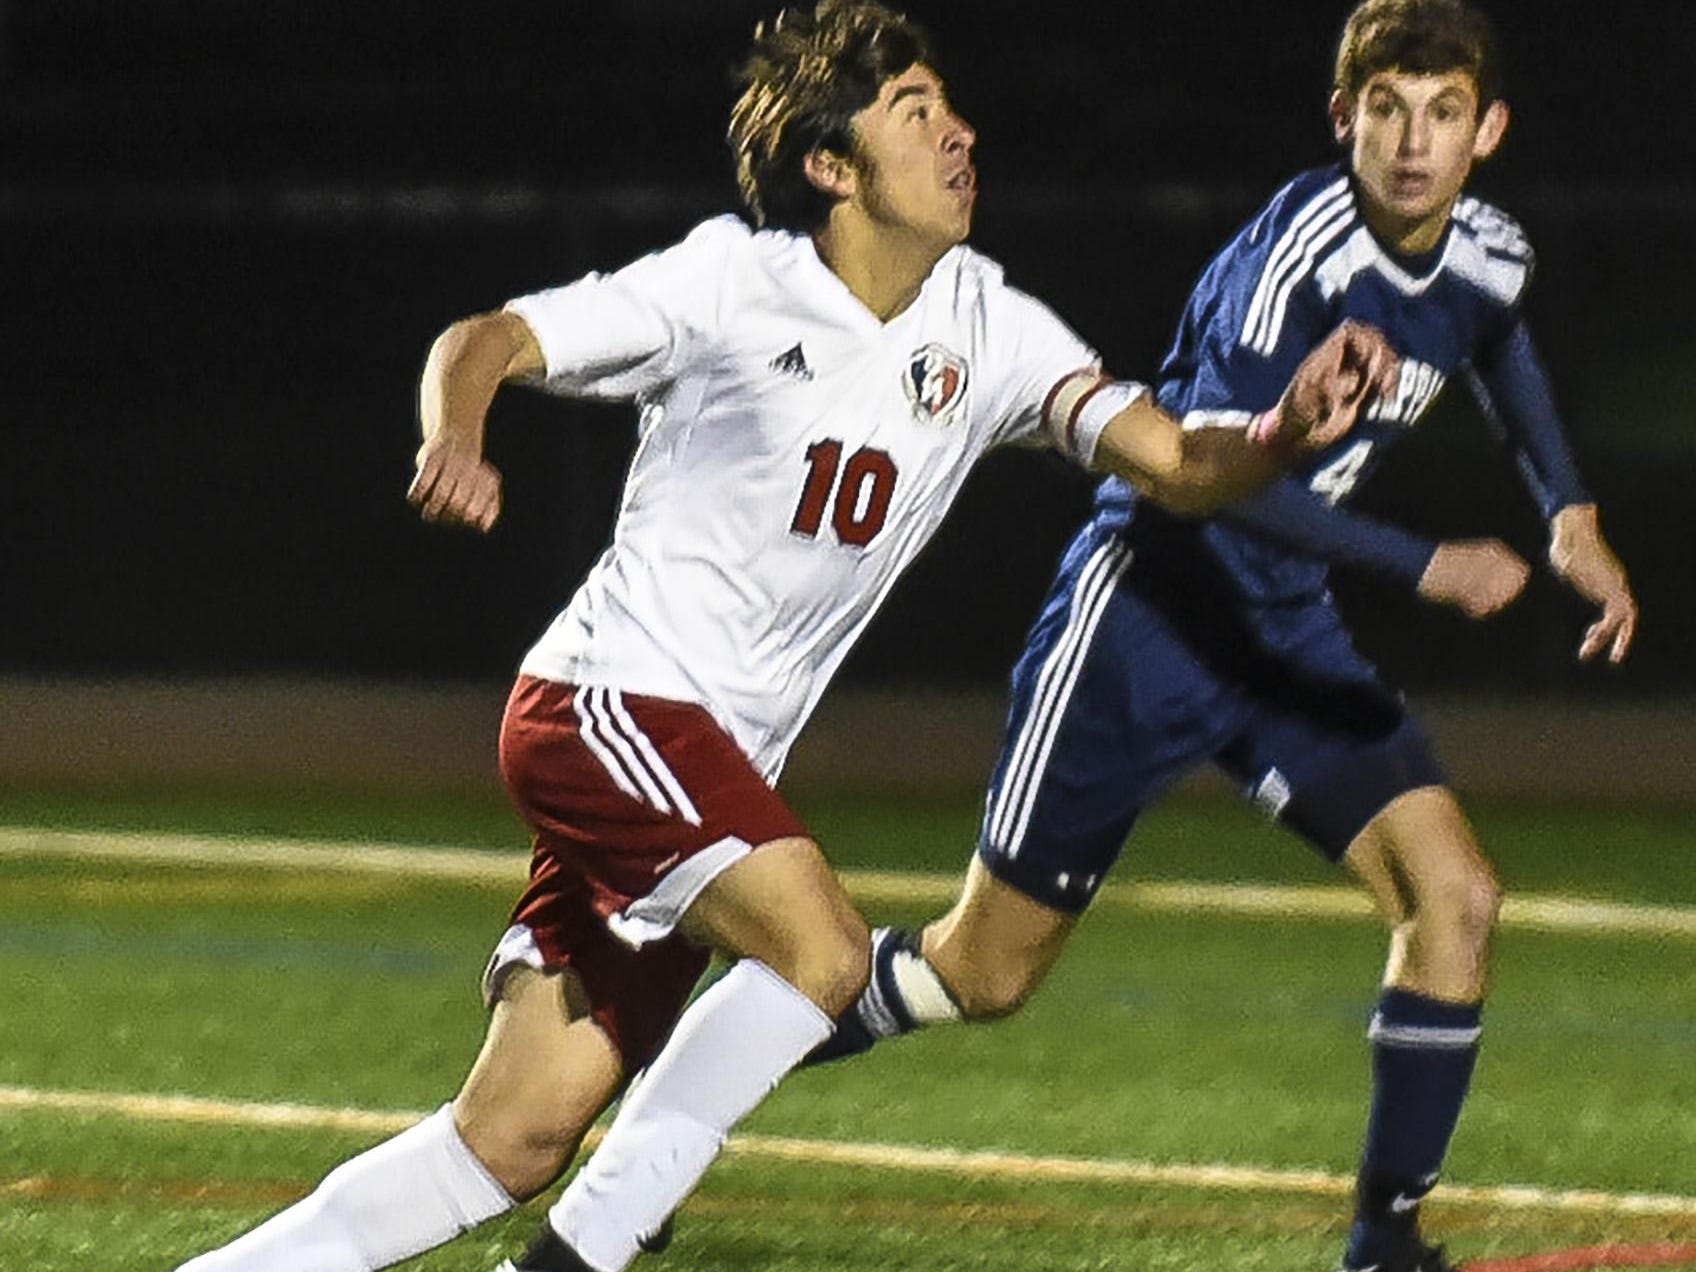 Mendham's Christian Pedercini (10) heads the ball away from Old Tappan's Luois Long (4) in the NJSIAA Group III Semifinal at Ridge High School in Basking Ridge, November 17, 2015. Photo by Warren Wetura for the Daily Record.